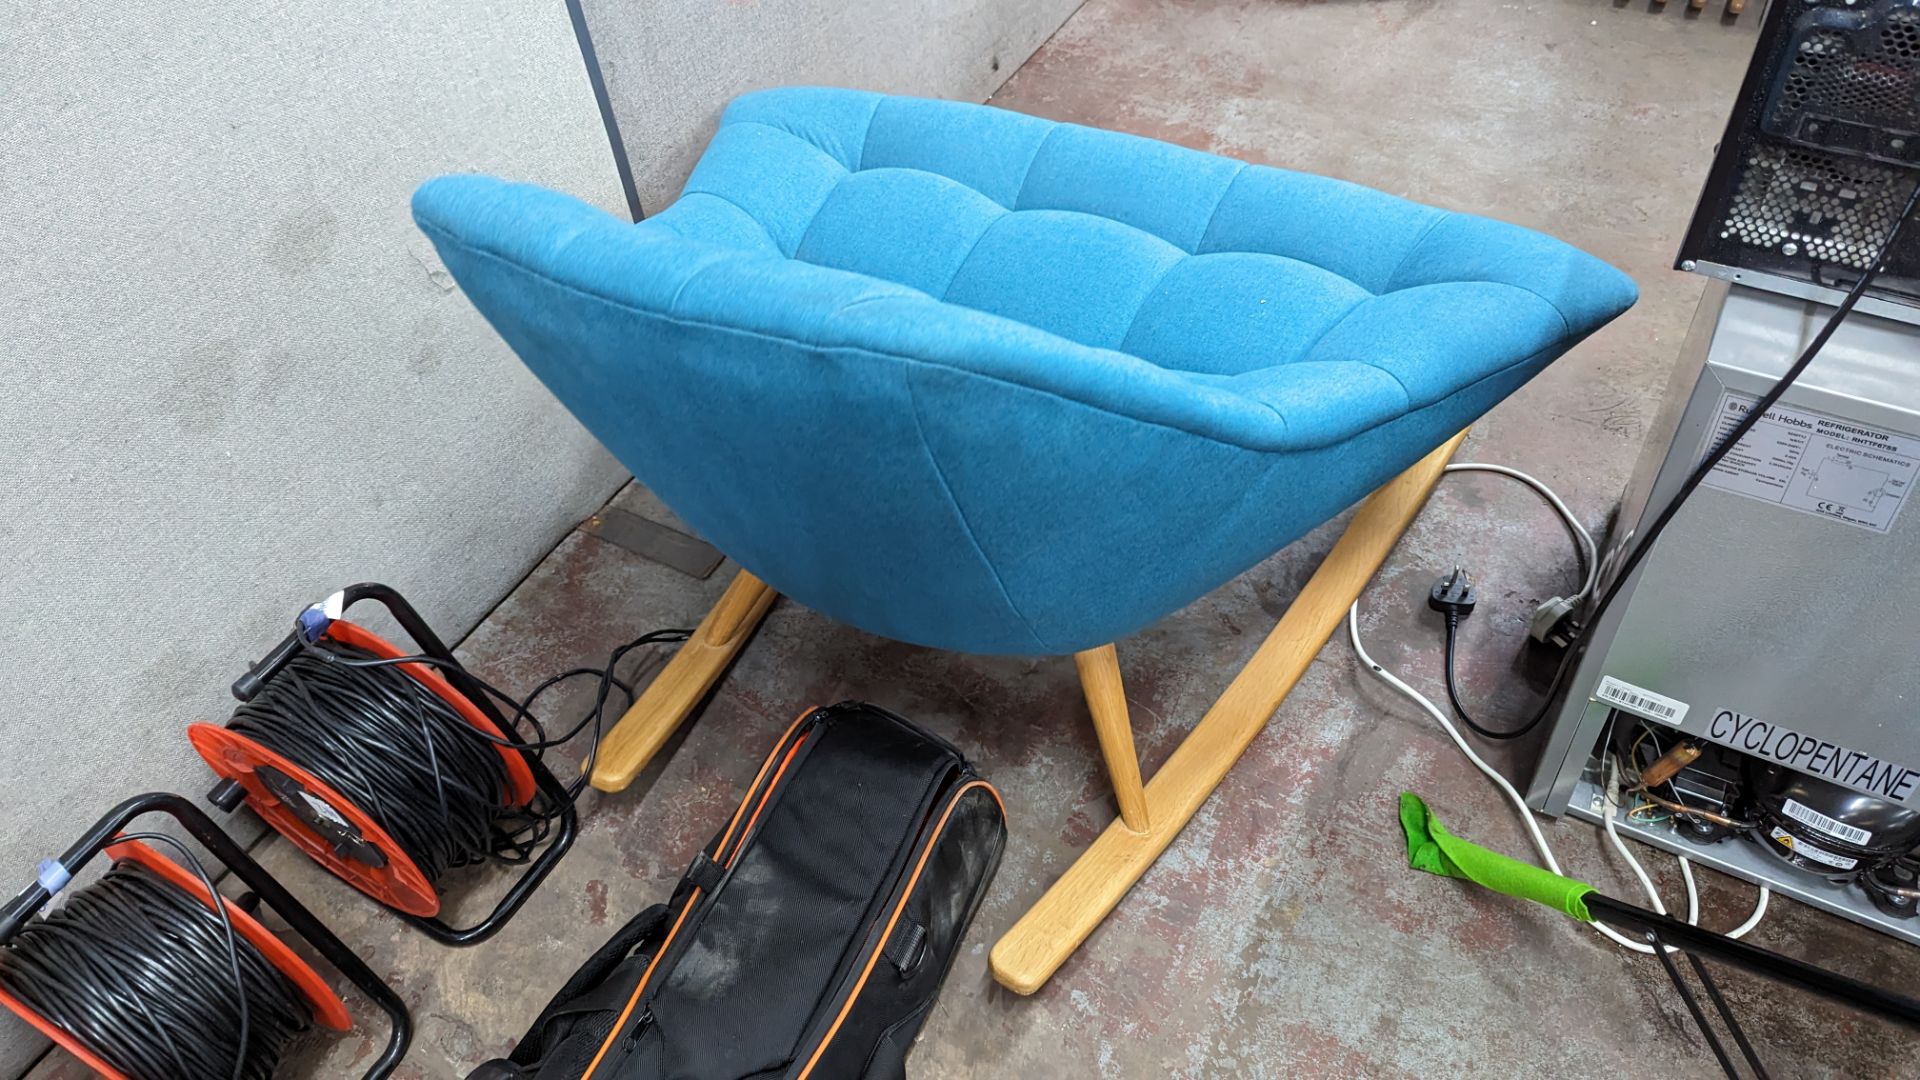 Rocking chair upholstered in aquamarine fabric on wooden legs - Image 5 of 7